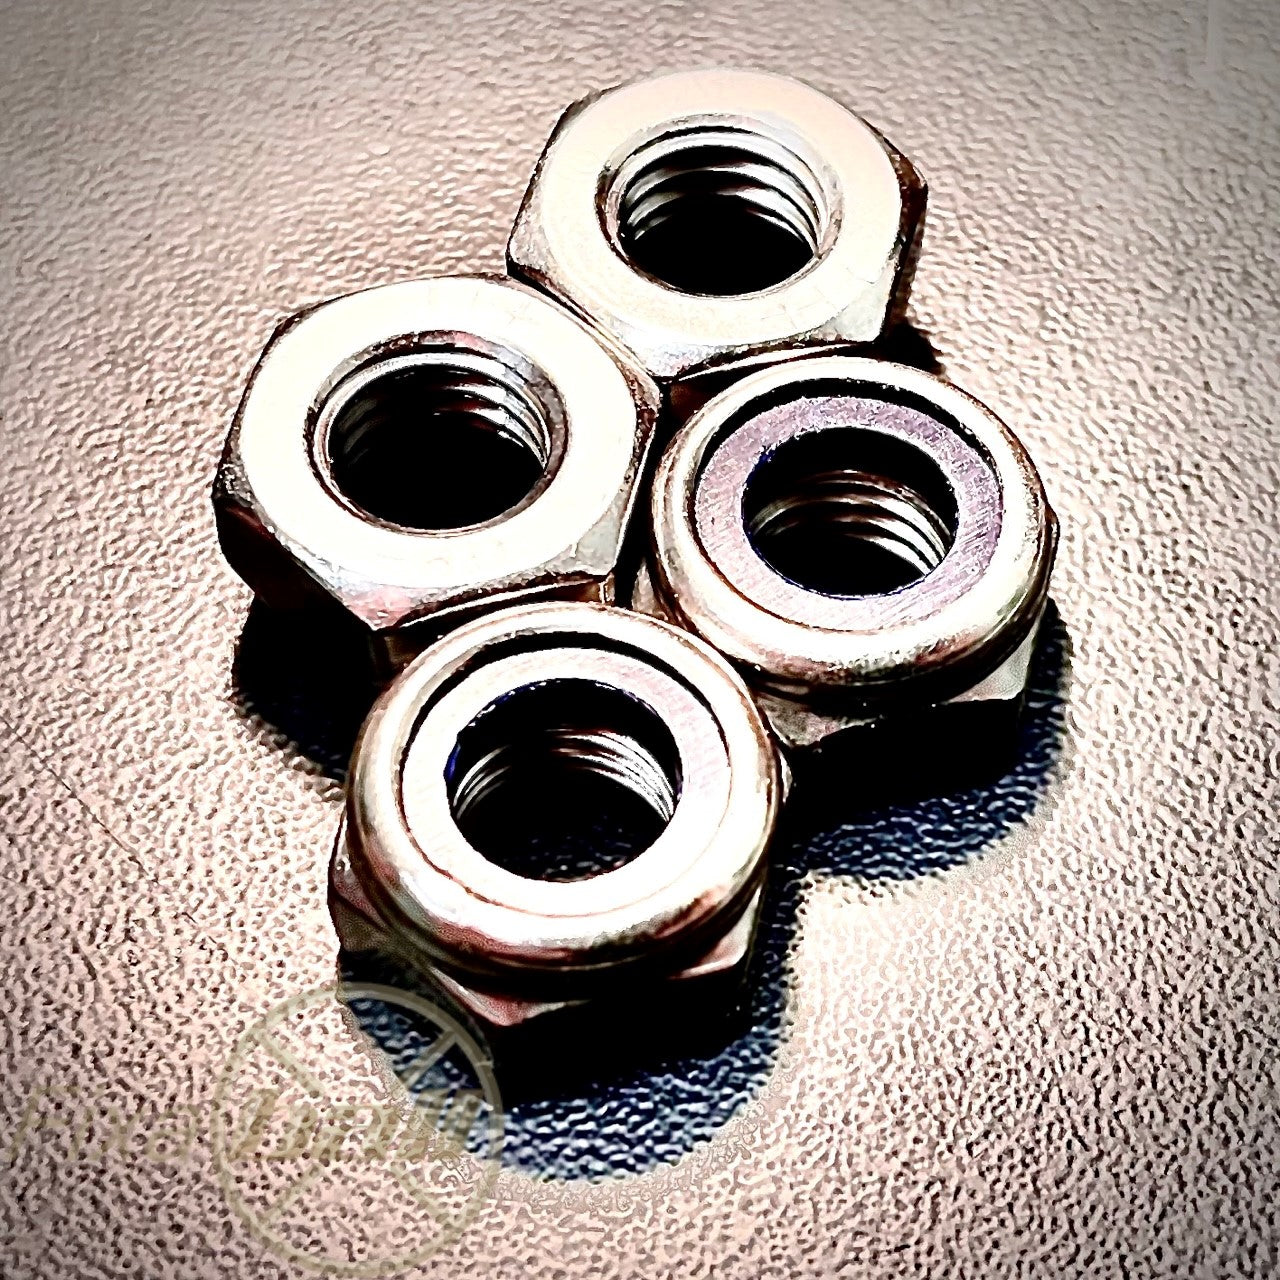 Metric, Under M10, Hex Nyloc Nut, A4/ 316 Stainless Steel, T-Type, DIN 985. Nuts Metric, Under M10, Hex Nyloc Nut, A4/ 316 Stainless Steel, T-Type, DIN 985. Nyloc Nuts